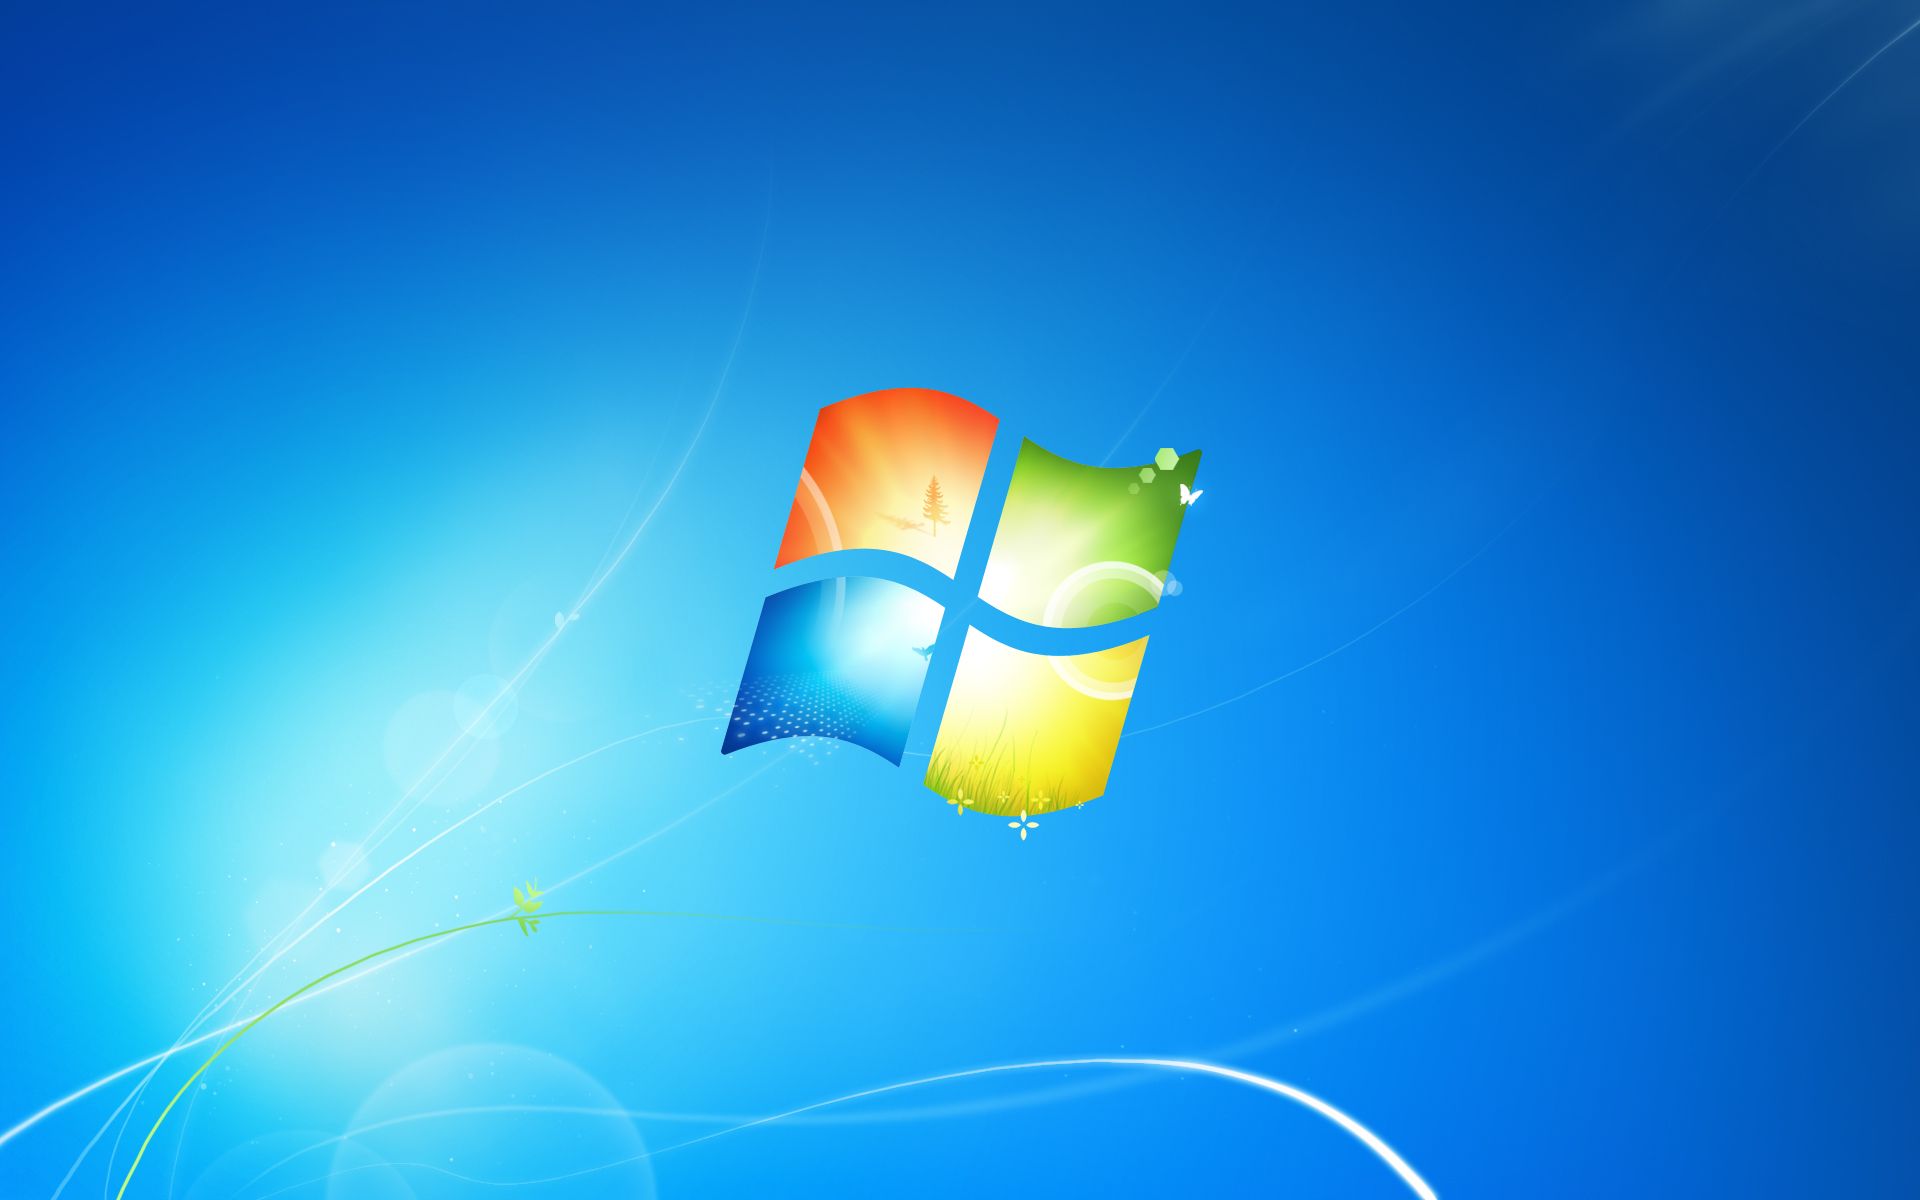 Windows Backgrounds Wallpapers